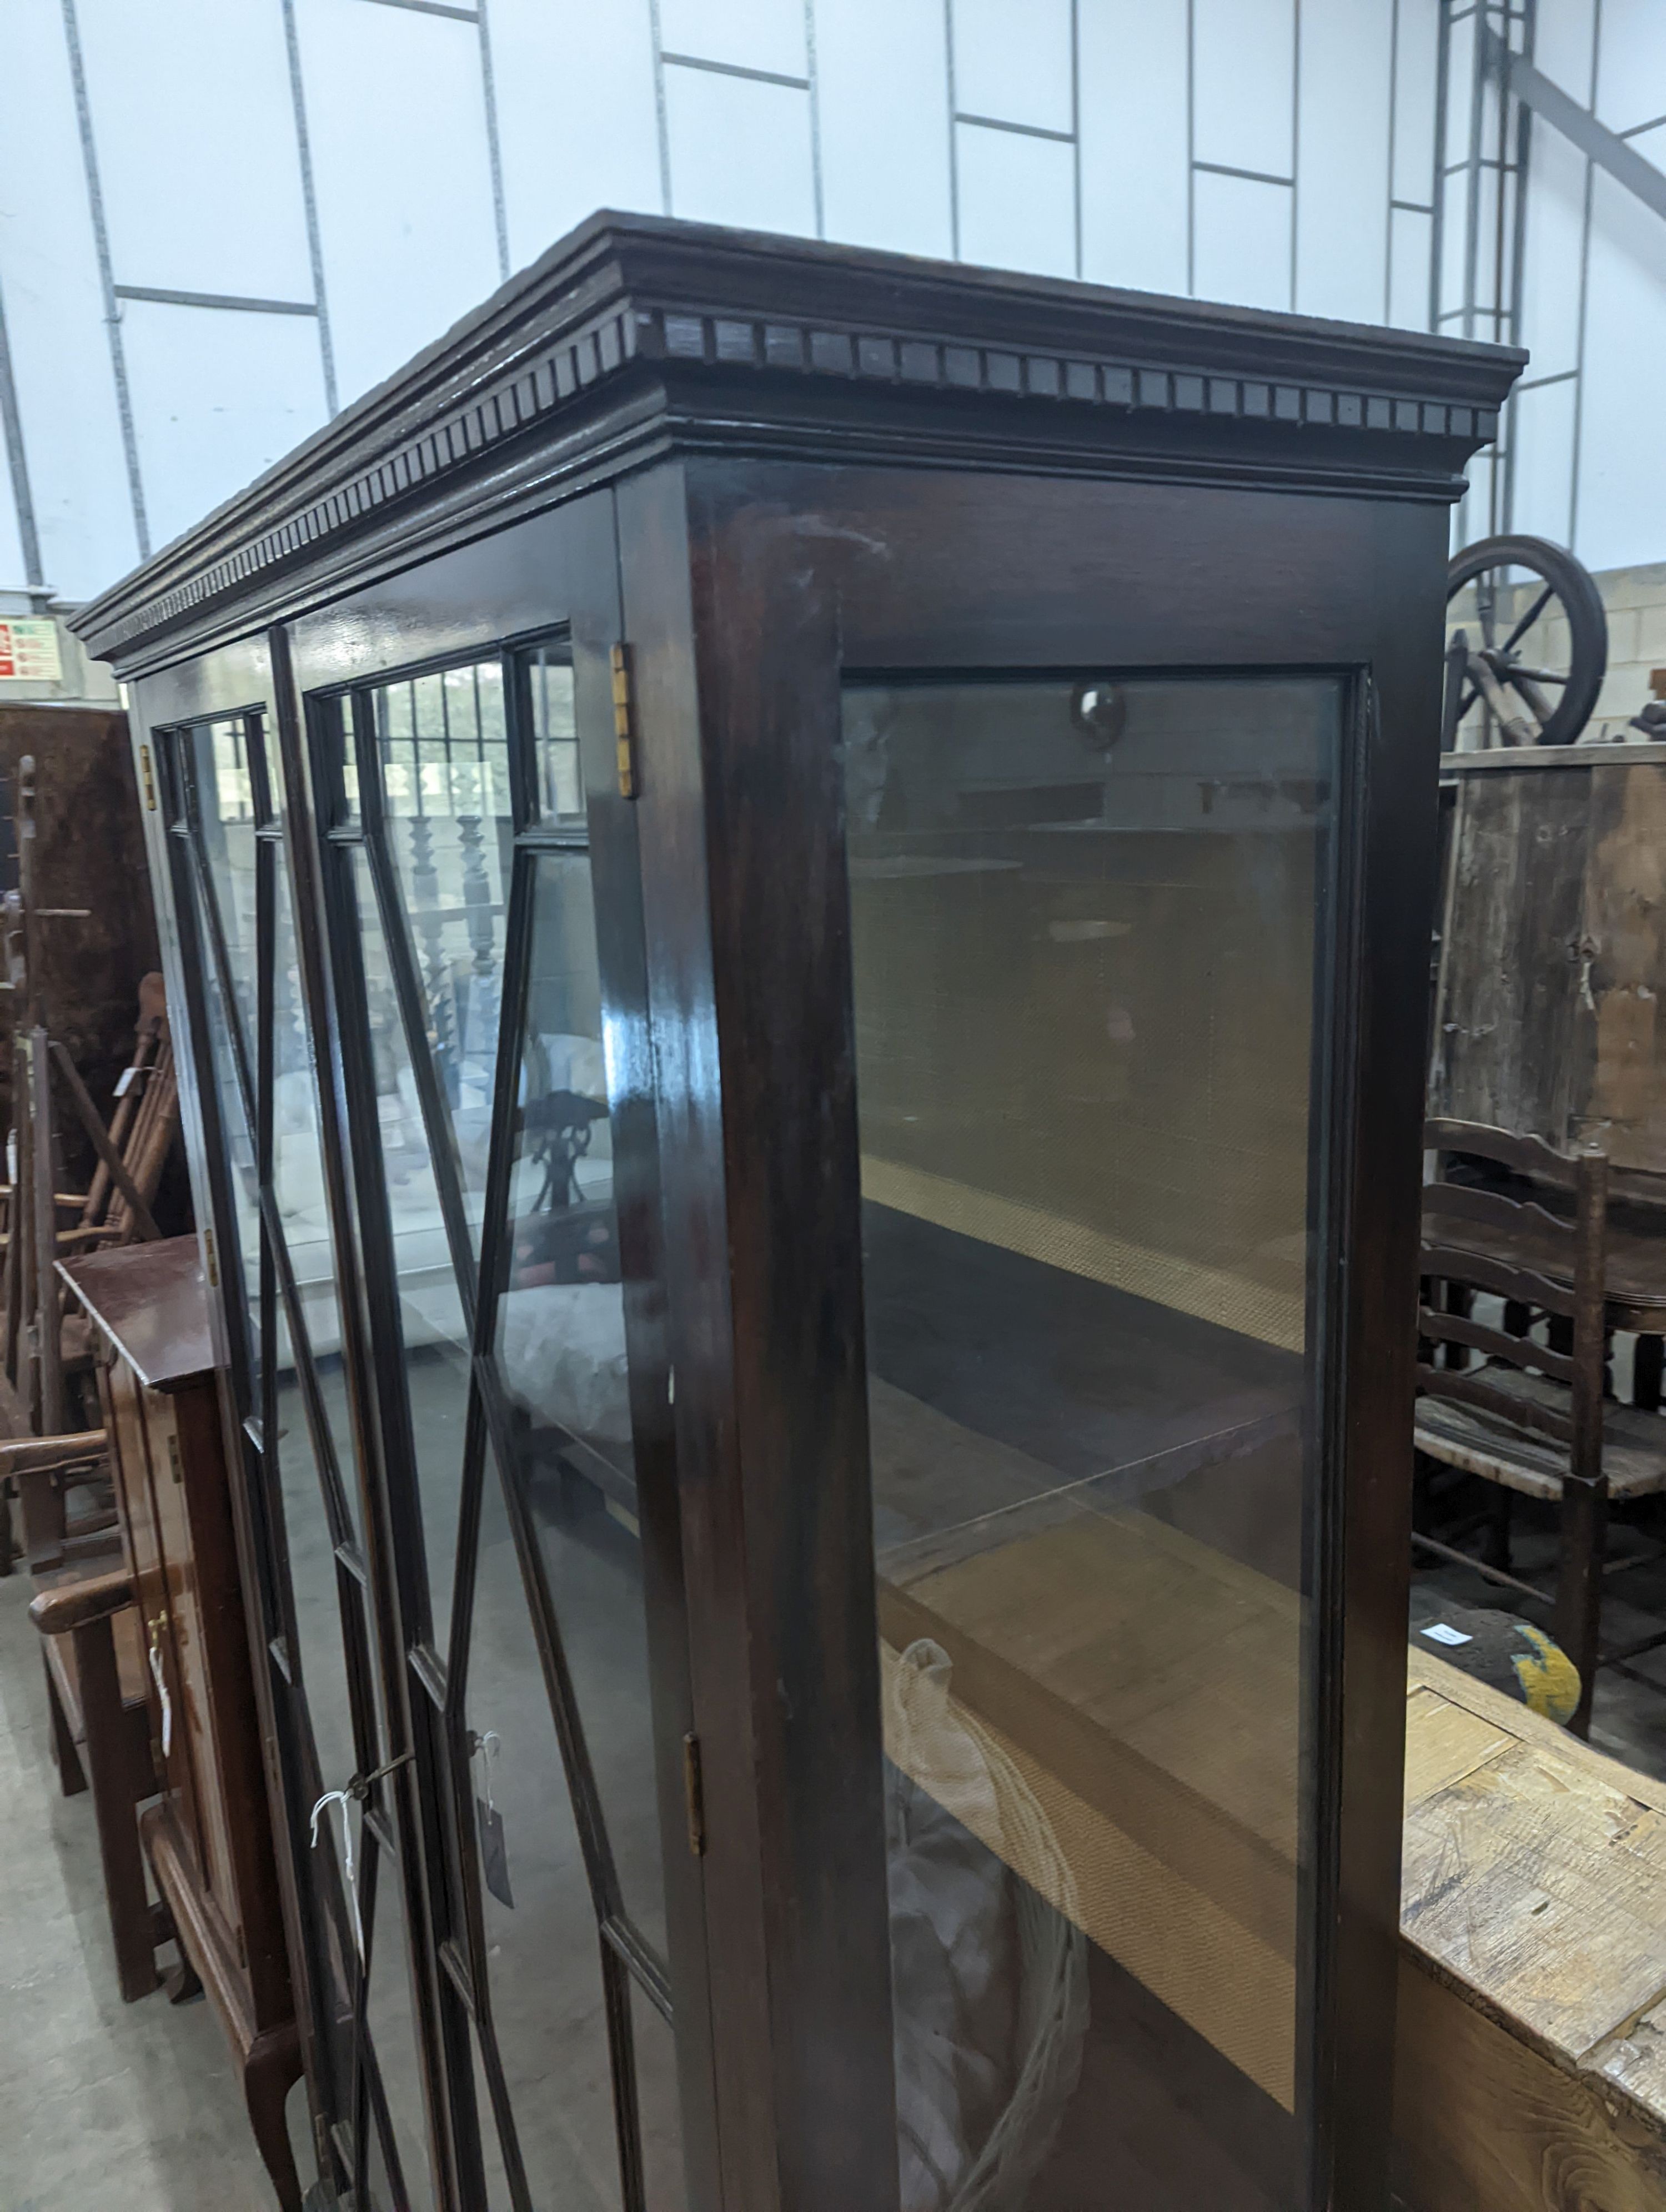 A reproduction George III style glazed mahogany two door display cabinet, width 108cm, depth 40cm, height 172cm